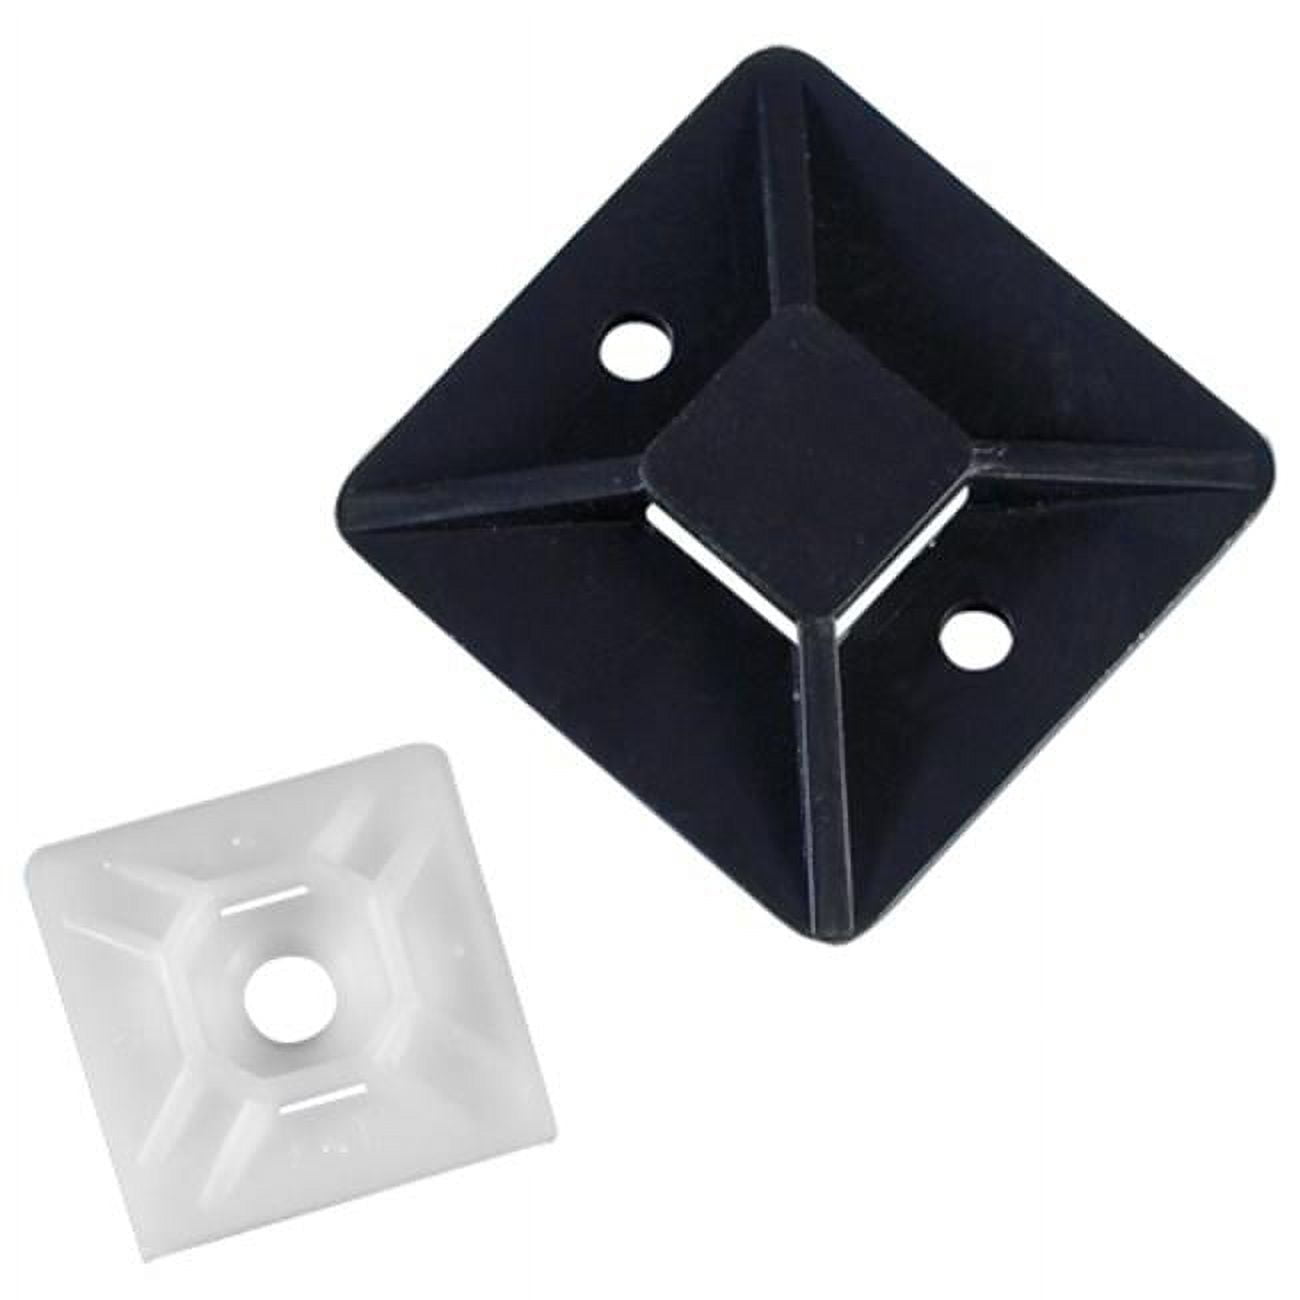 Ctm15n 1.5 X 1.5 In. Natural Cable Tie Mounts